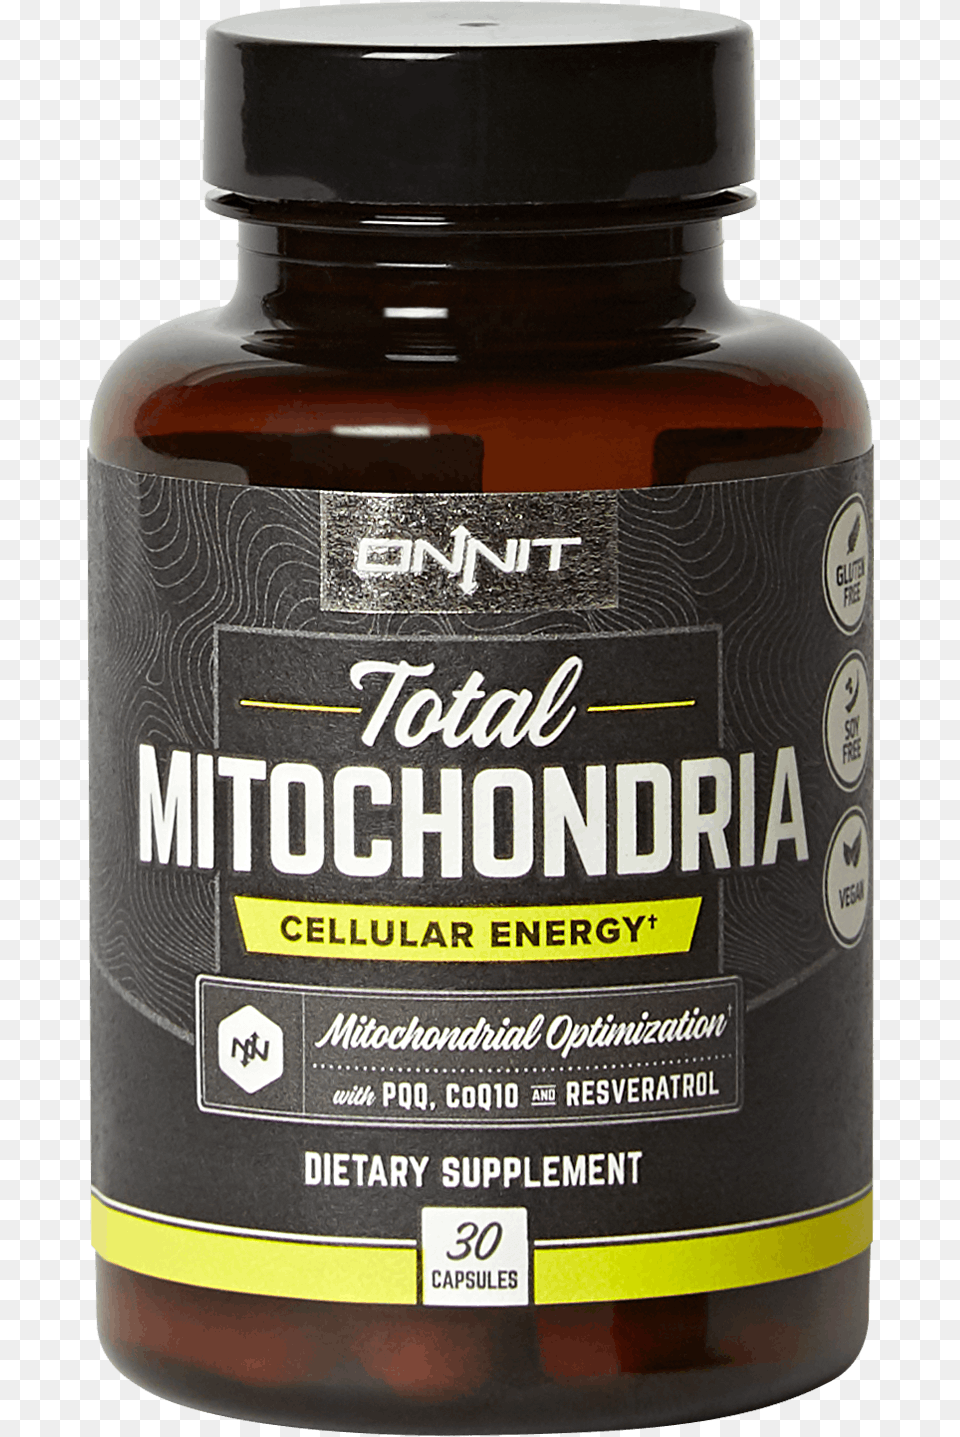 Total Mitochondria Onnit Total Mitochondria, Astragalus, Flower, Plant, Can Png Image